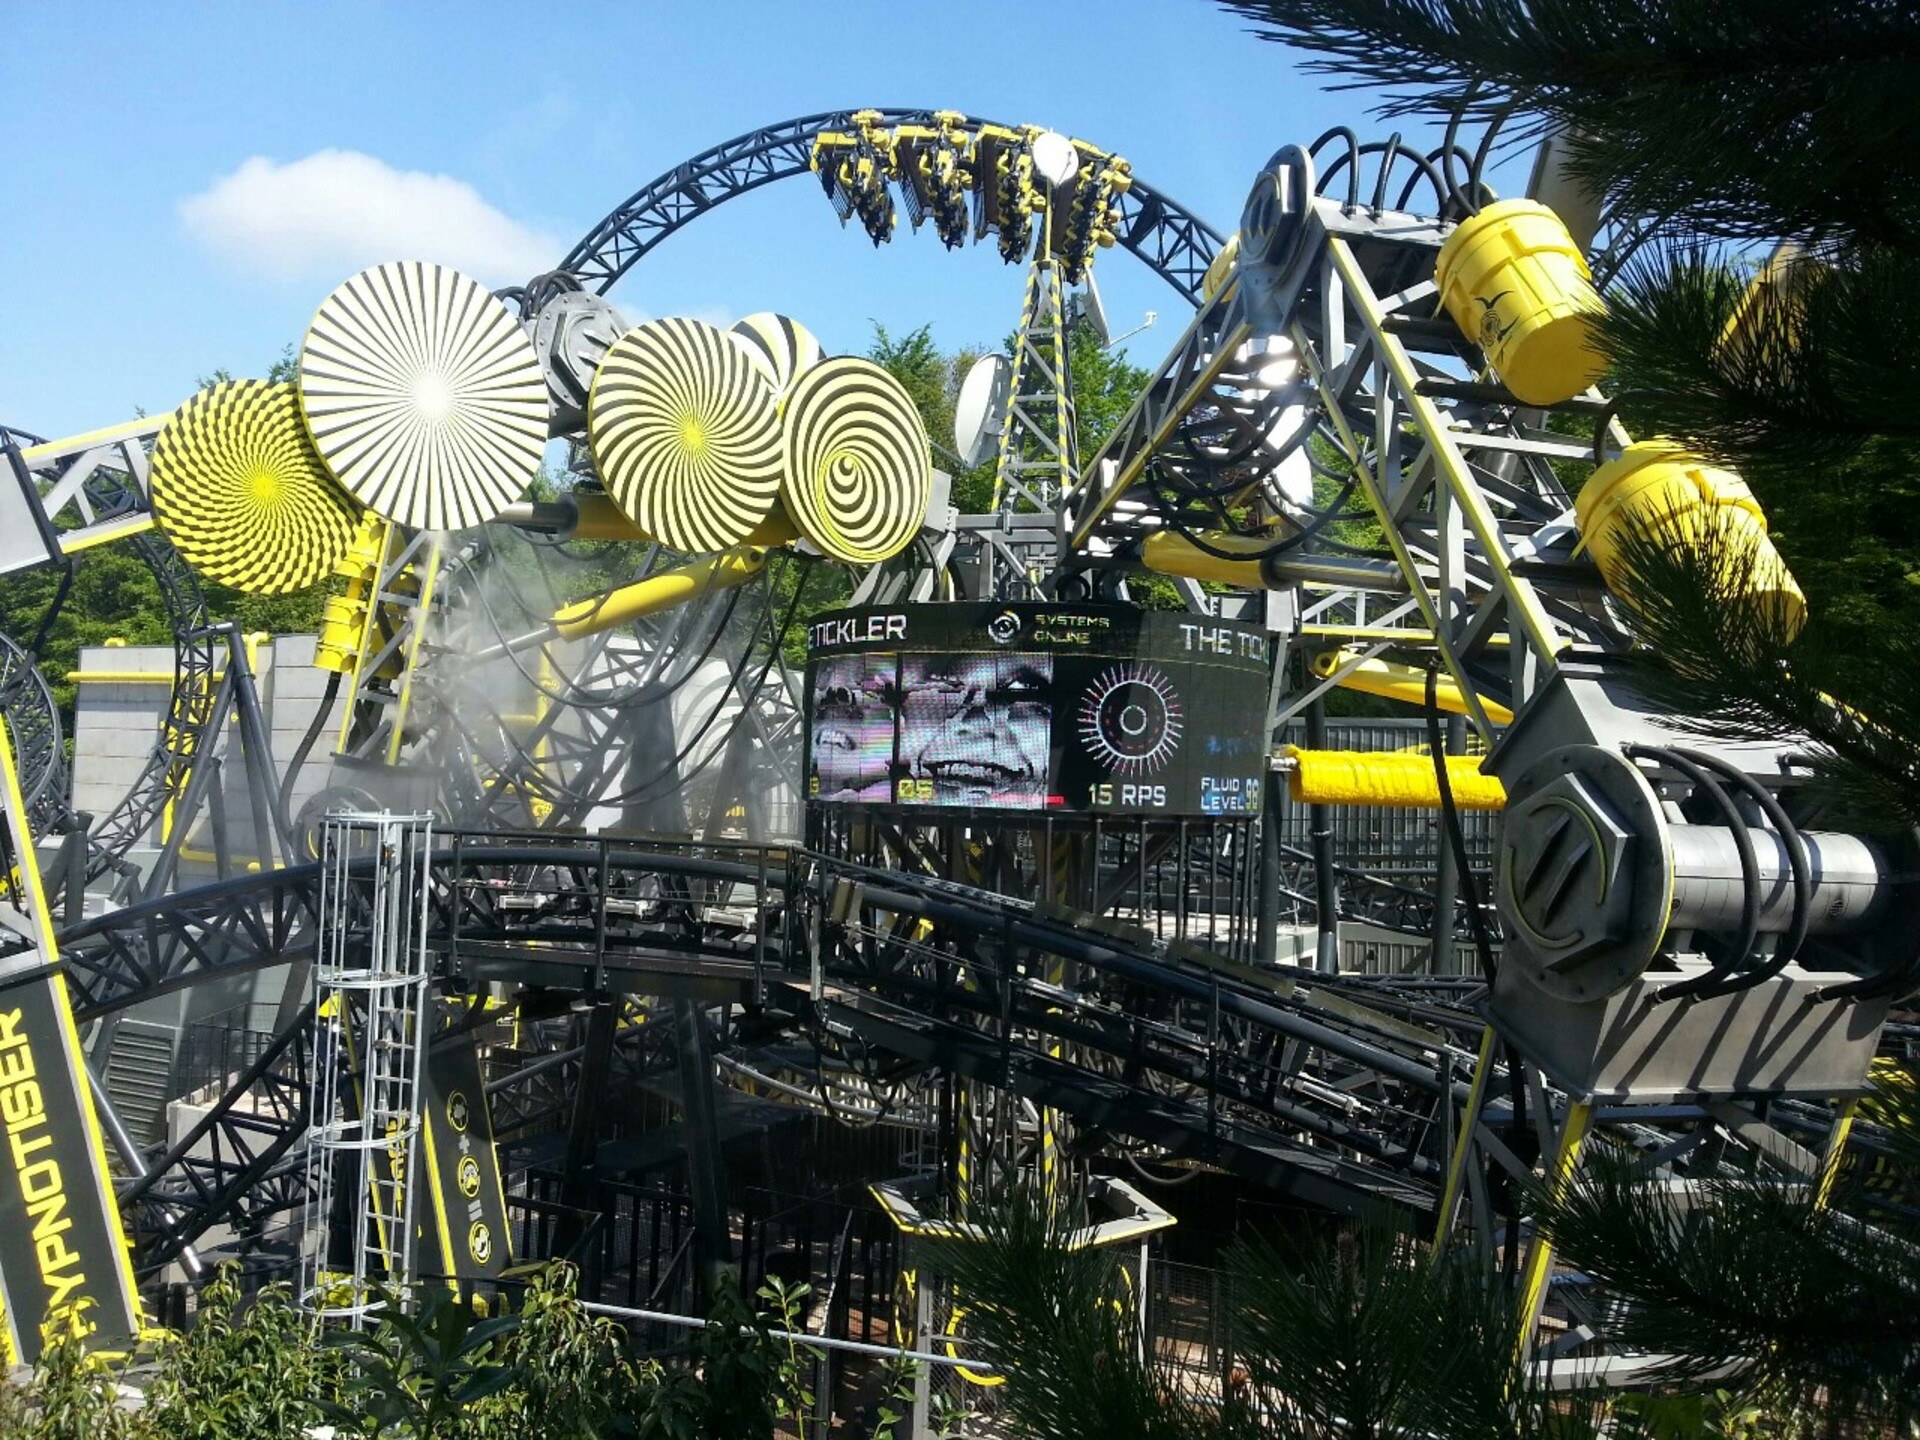 A roller coaster in grey and yellow, with tons of bright spirals on panels and some big screens in the middle showing people smiling